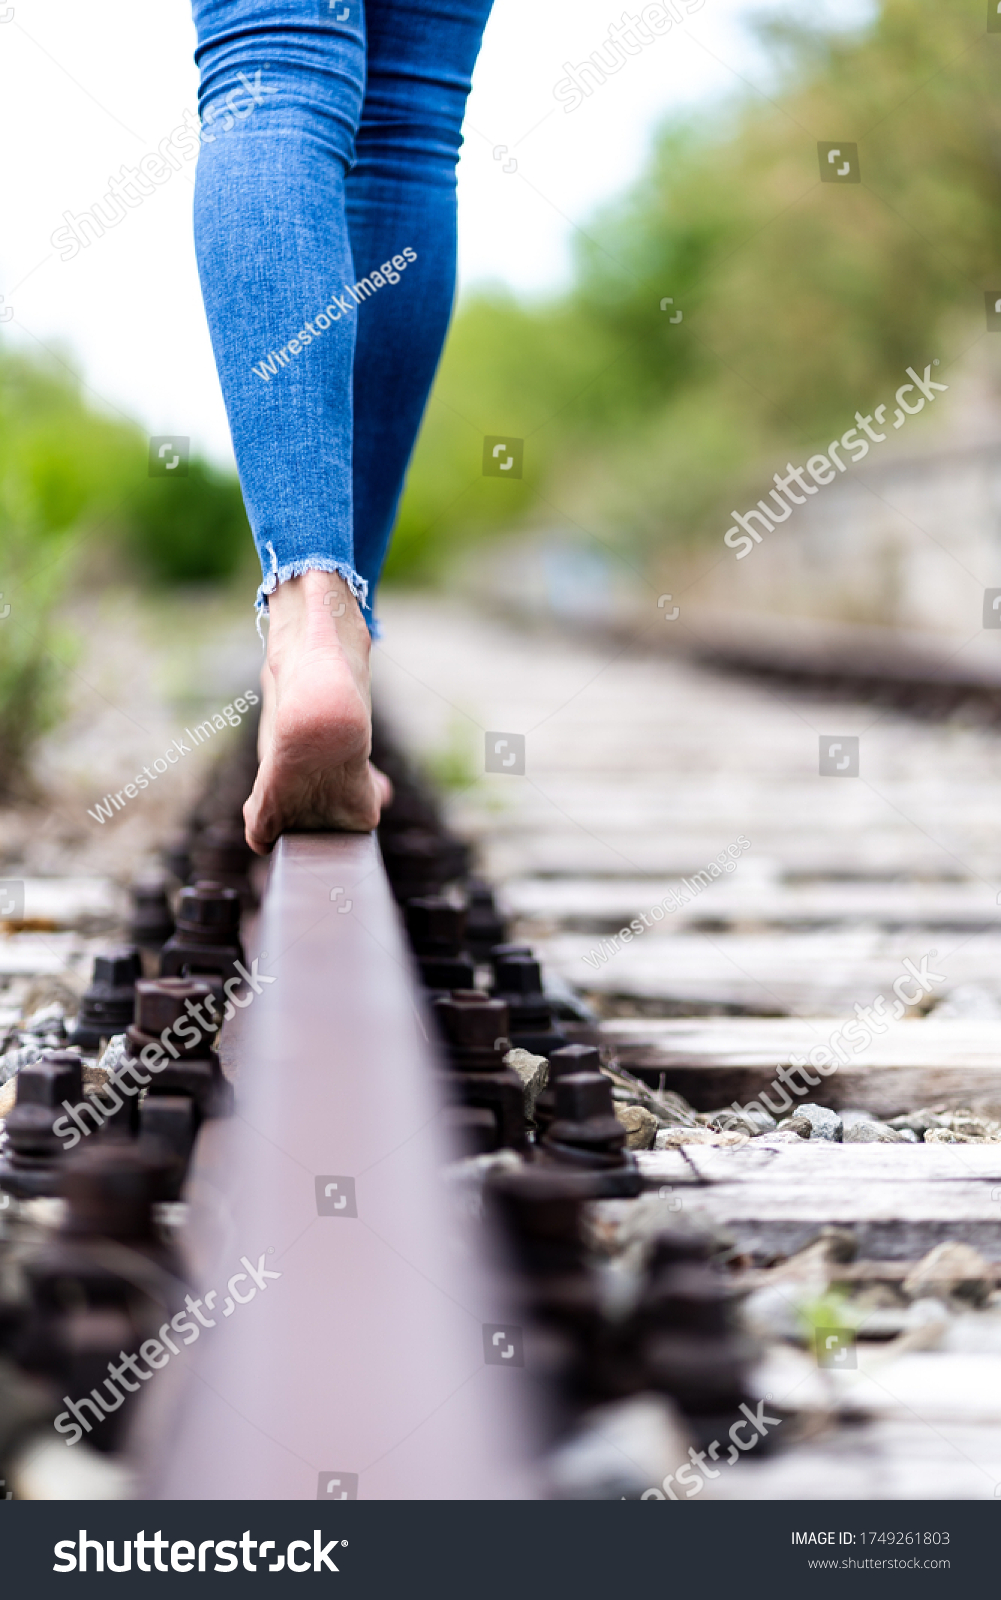 https://image.shutterstock.com/shutterstock/photos/1749261803/display_1500/stock-photo-a-vertical-shot-of-a-female-in-jeans-walking-through-the-train-rails-barefoot-1749261803.jpg